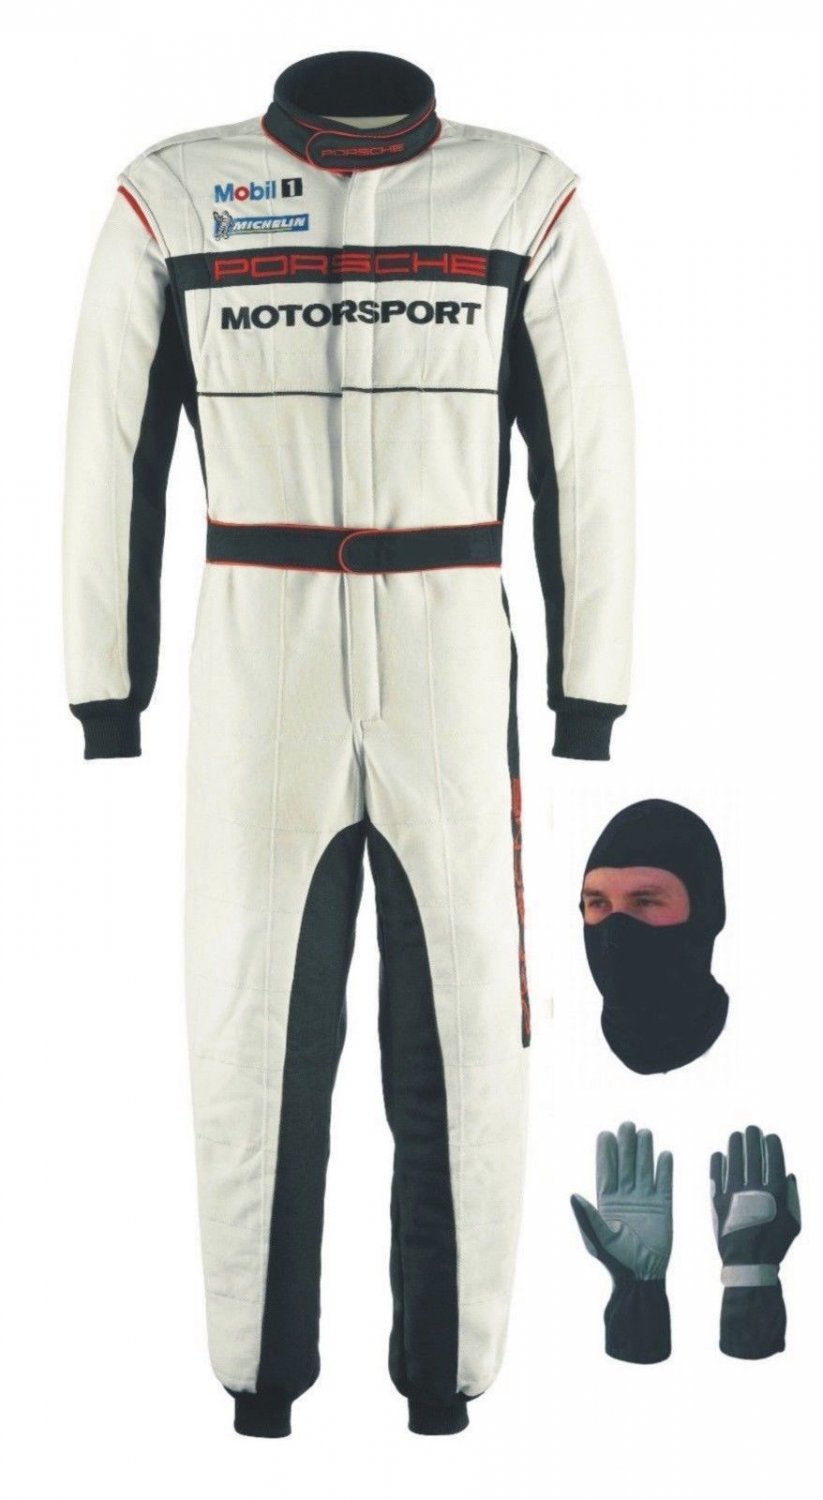 FA GO KART RACE SUIT CIK/FIA LEVEL 2 APPROVED WITH FREE GIFTS INCLUDED 